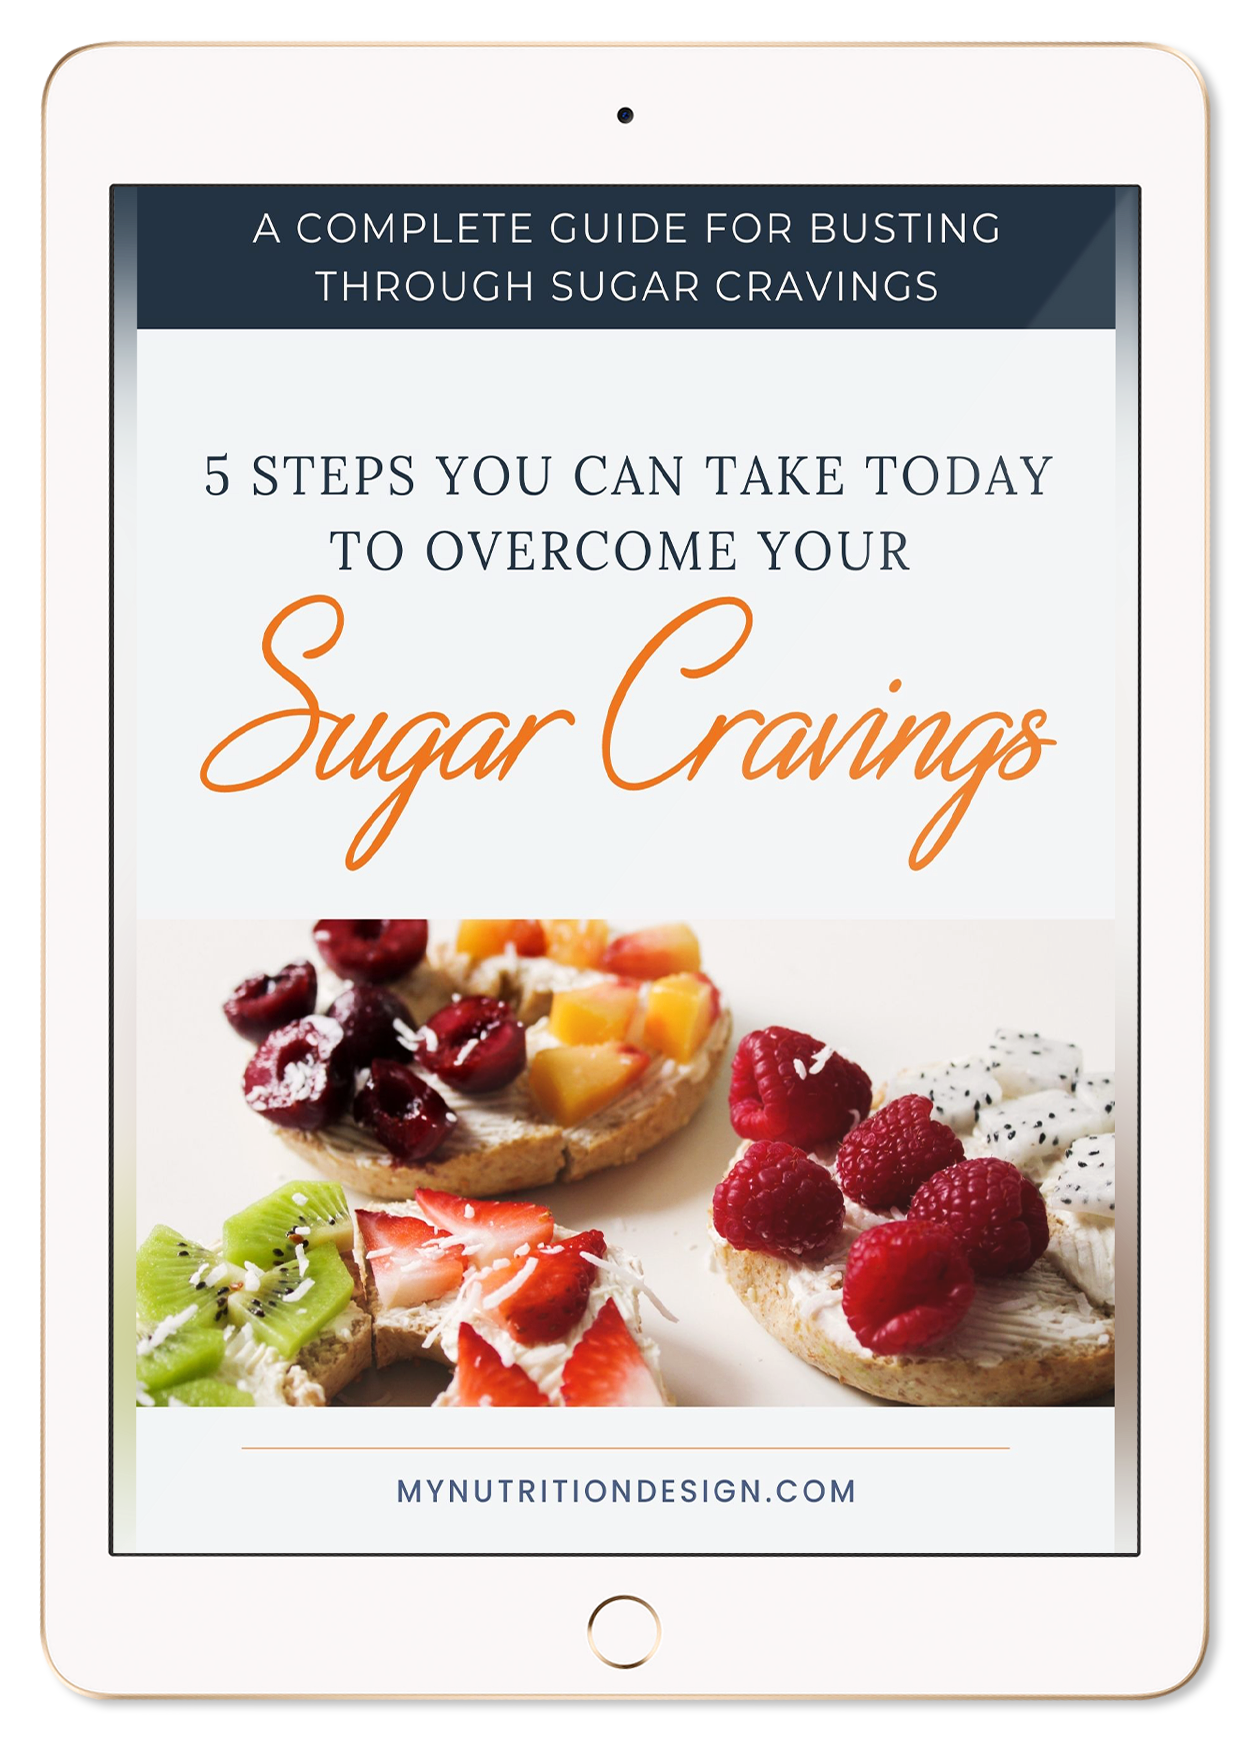 VOULA COPY - 5 Steps You Can Take today to Overcome Sugar Cravings